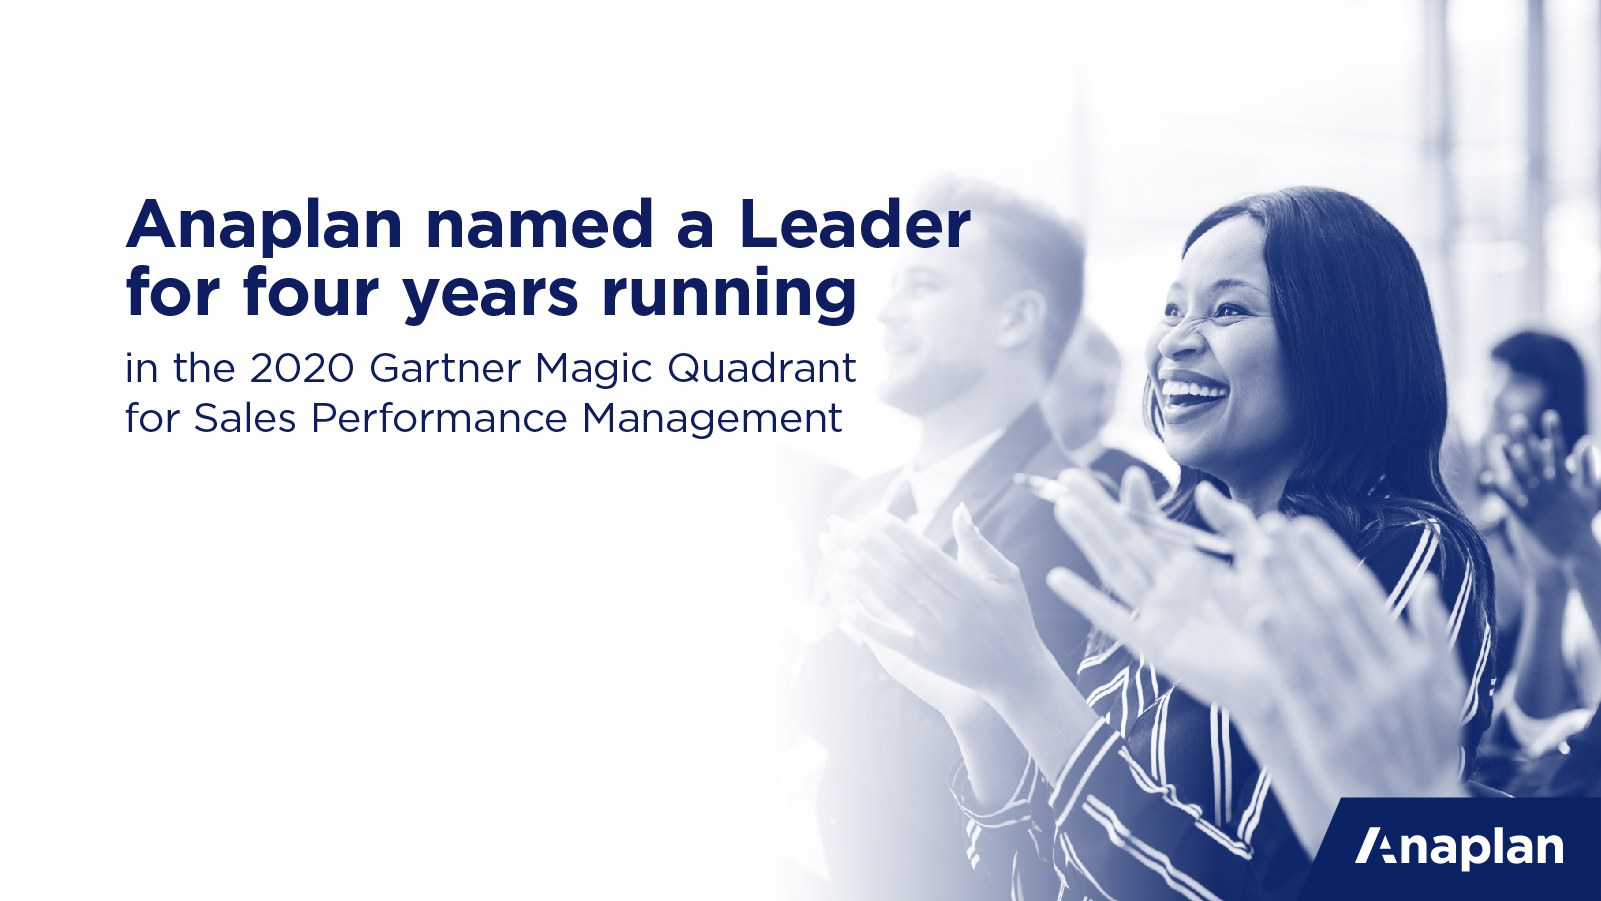 Anaplan named a Leader for four years running